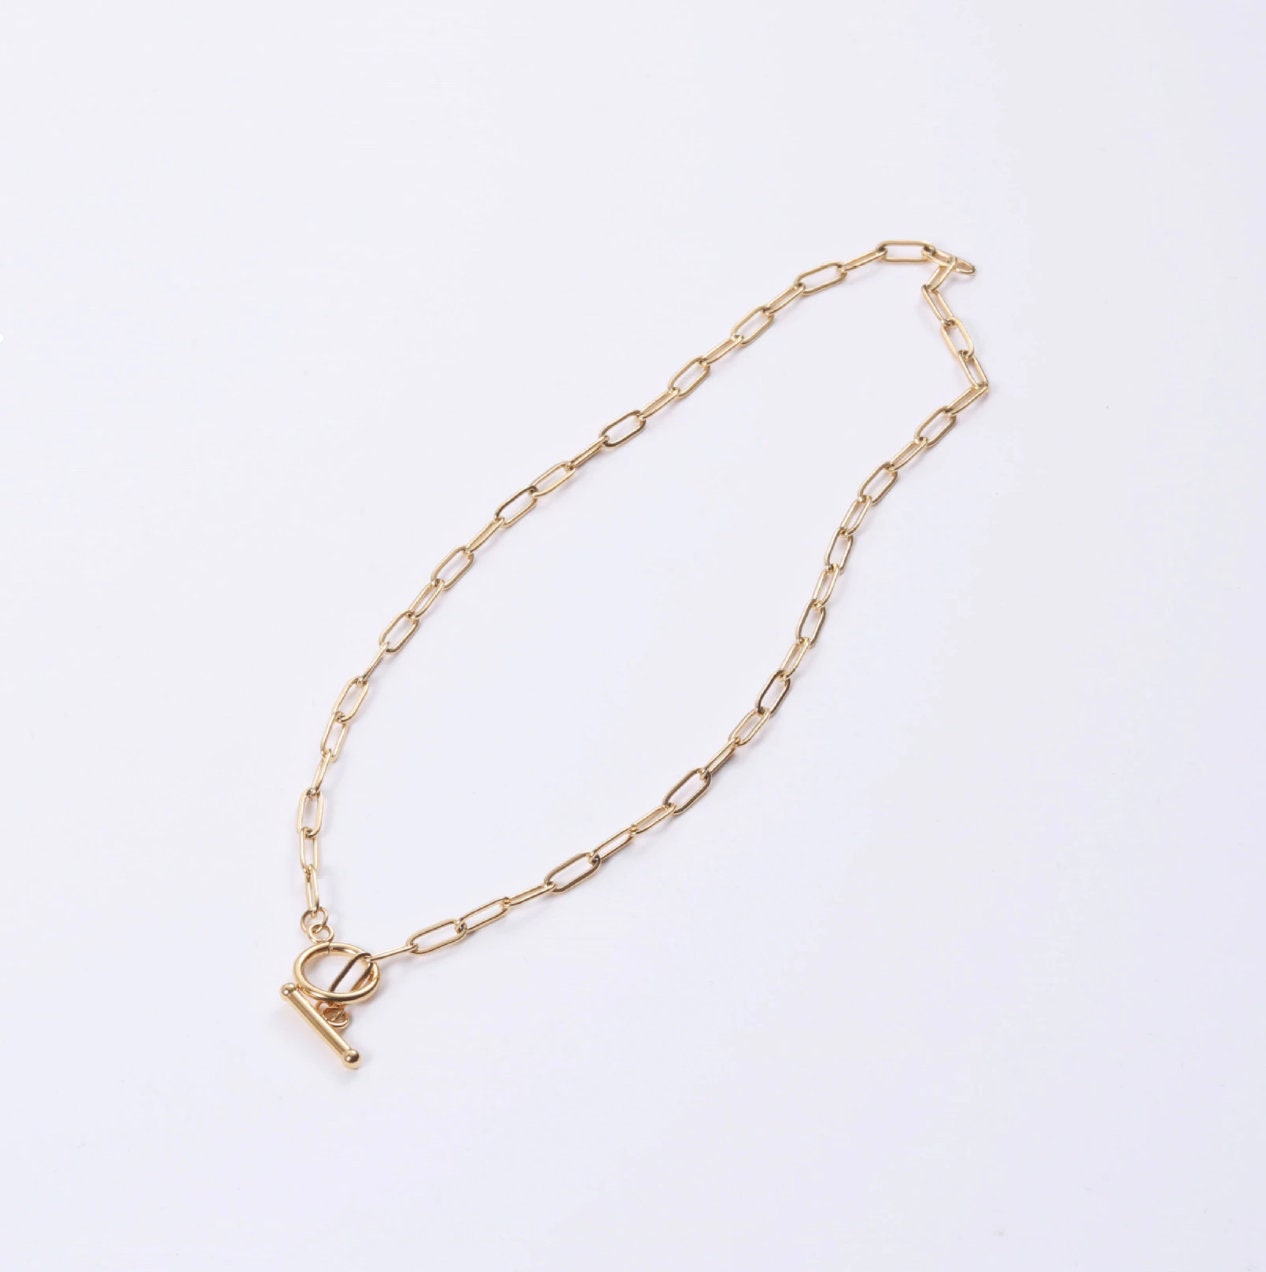 Jumwrit Dainty Curb Link Chain Necklace Engraved Bar Necklace Simulated  Pearl Pendant Necklace Toggl…See more Jumwrit Dainty Curb Link Chain  Necklace